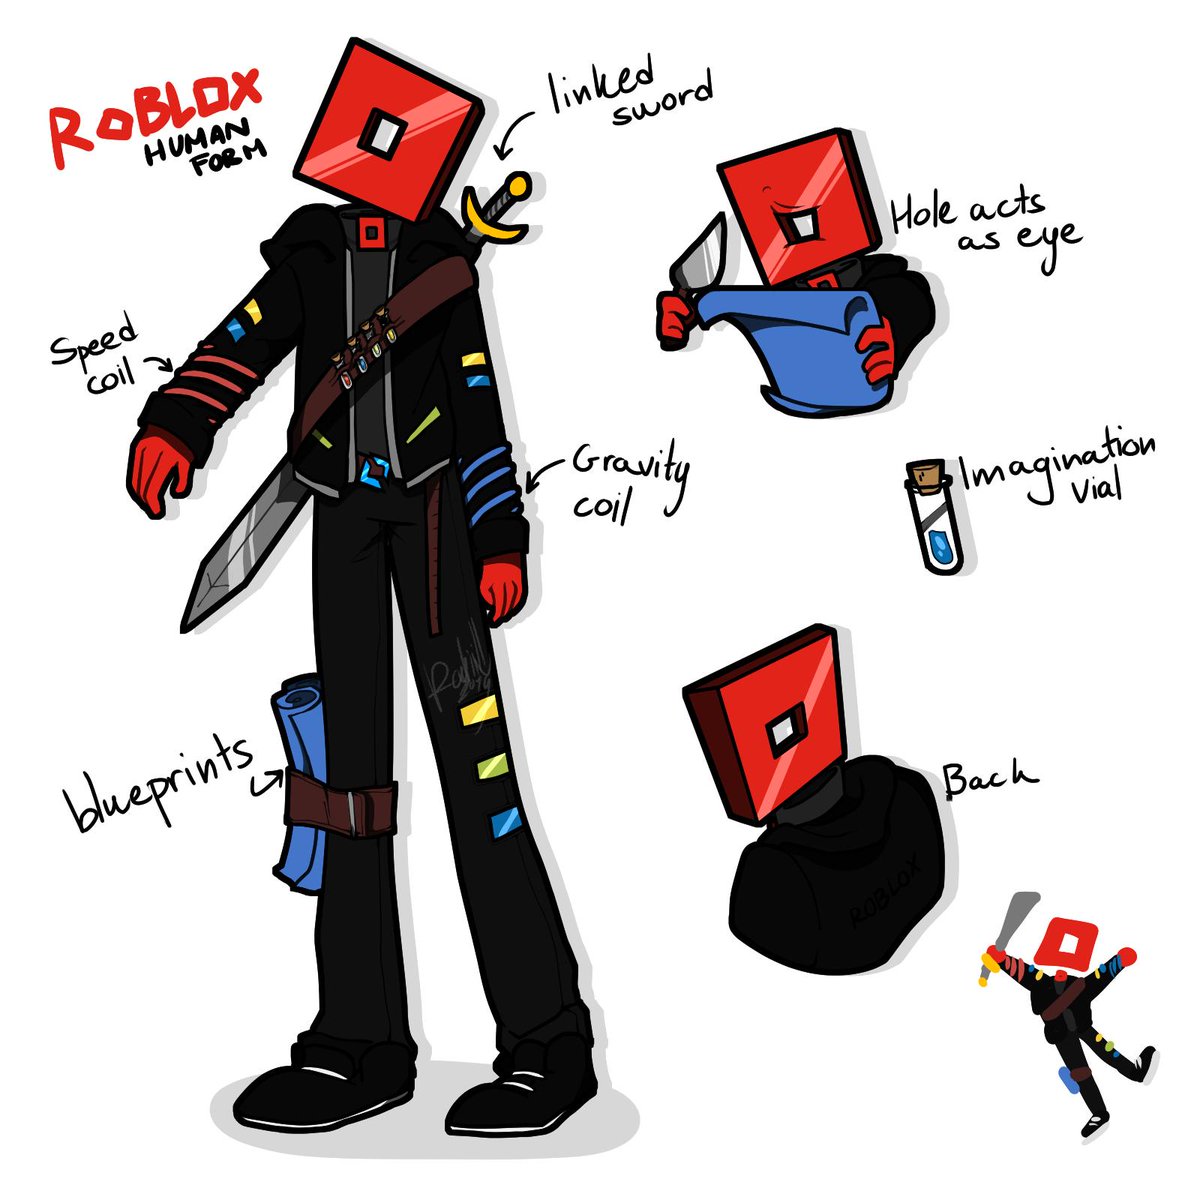 Roblox On Twitter Design An Rthro Avatar Submit Your Concept See Your Art Come To Life The Robloxrthrocontest Is Back Design Your Original Rthro Character To Be Included In - roblox profile picture animation